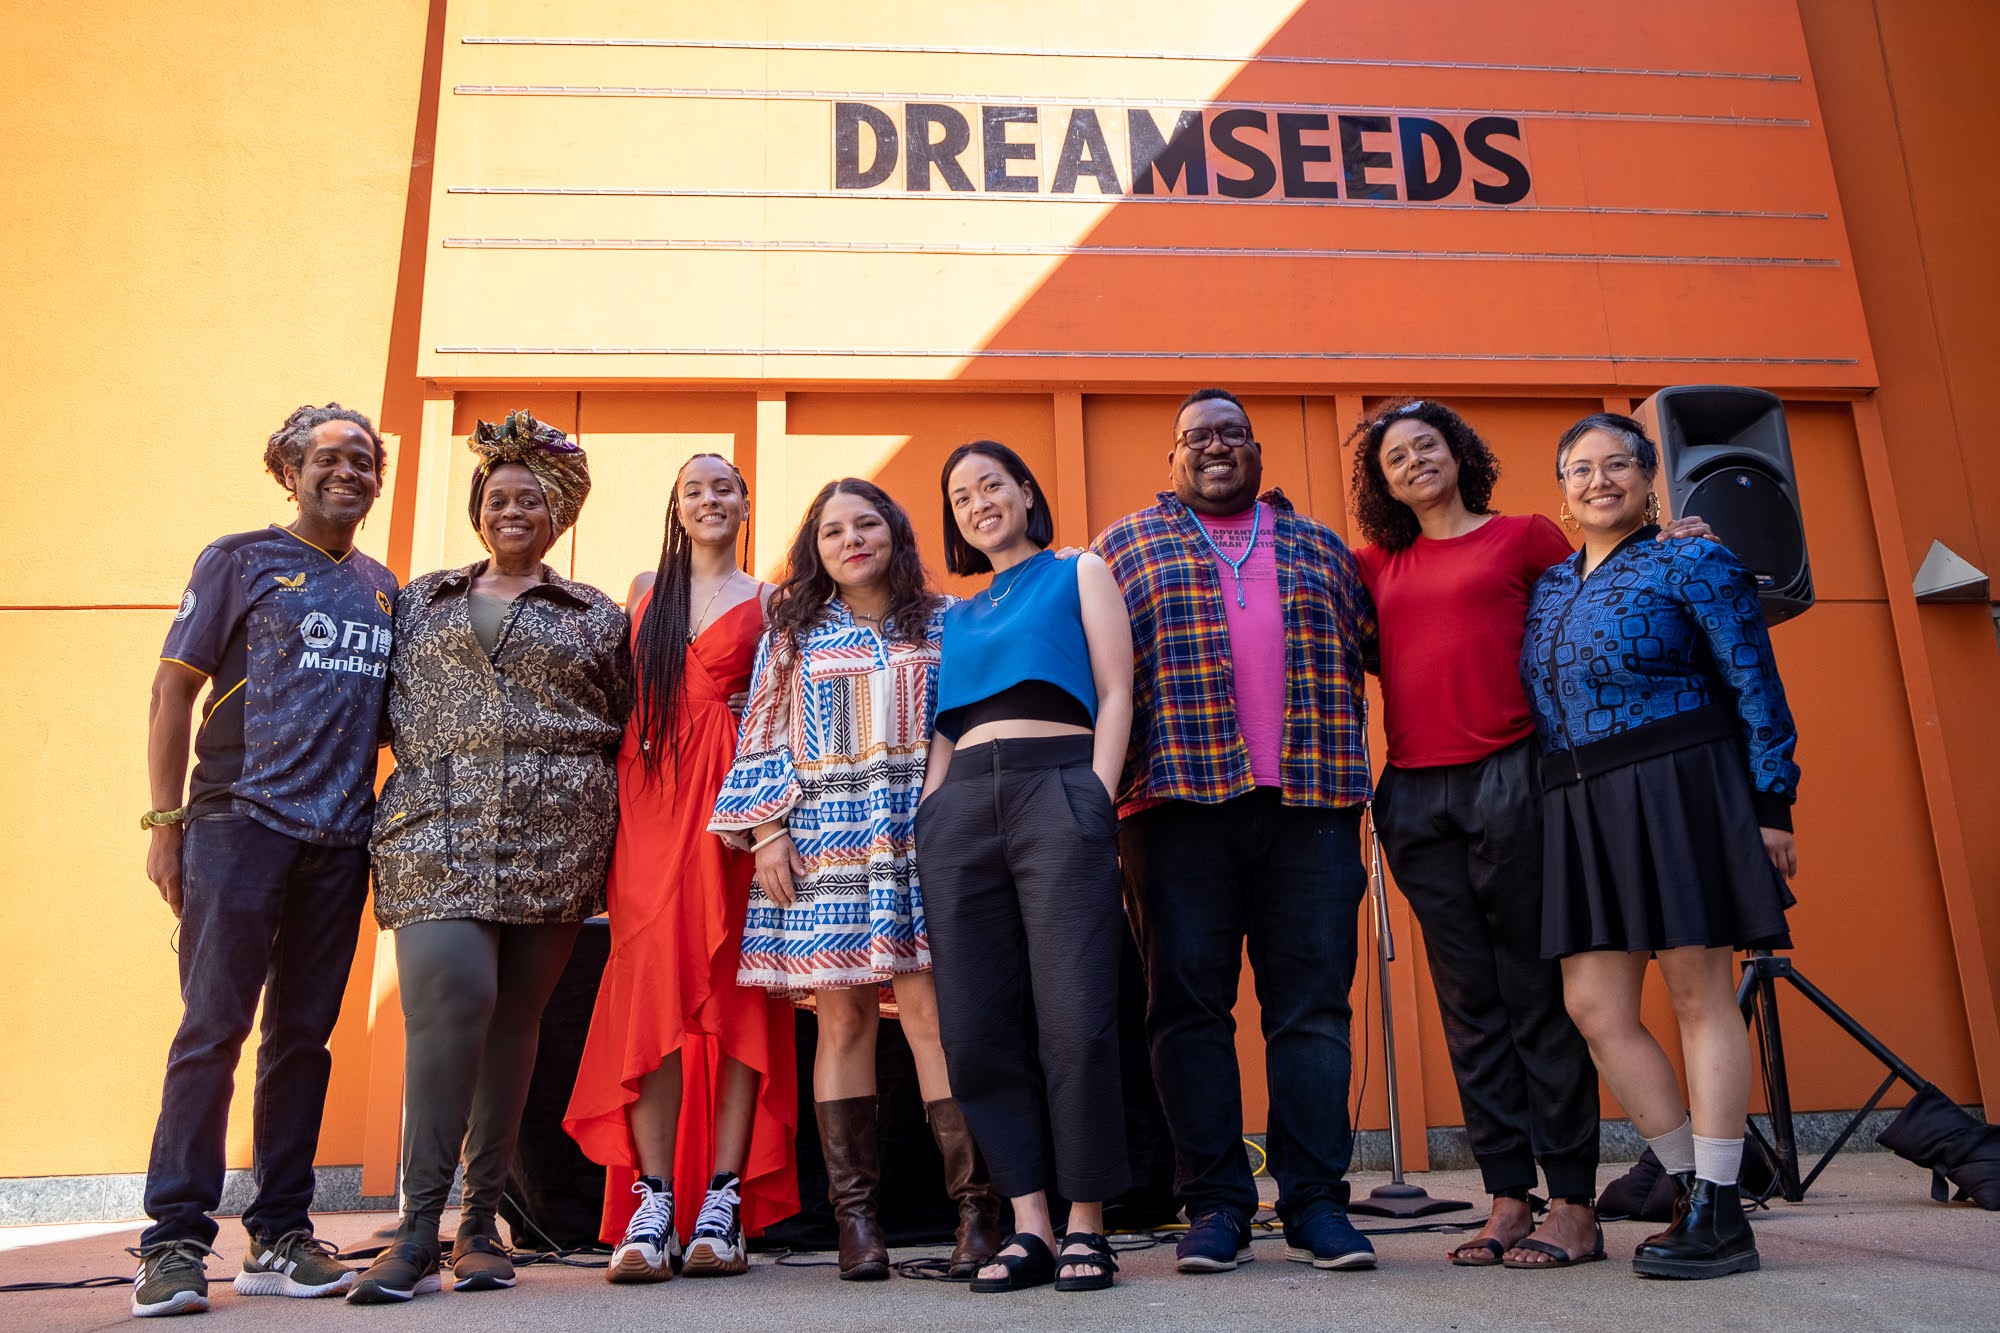 August 17, 2022 - YBCA 10 presents dreamseeds experience: a creative culmination of art and activism